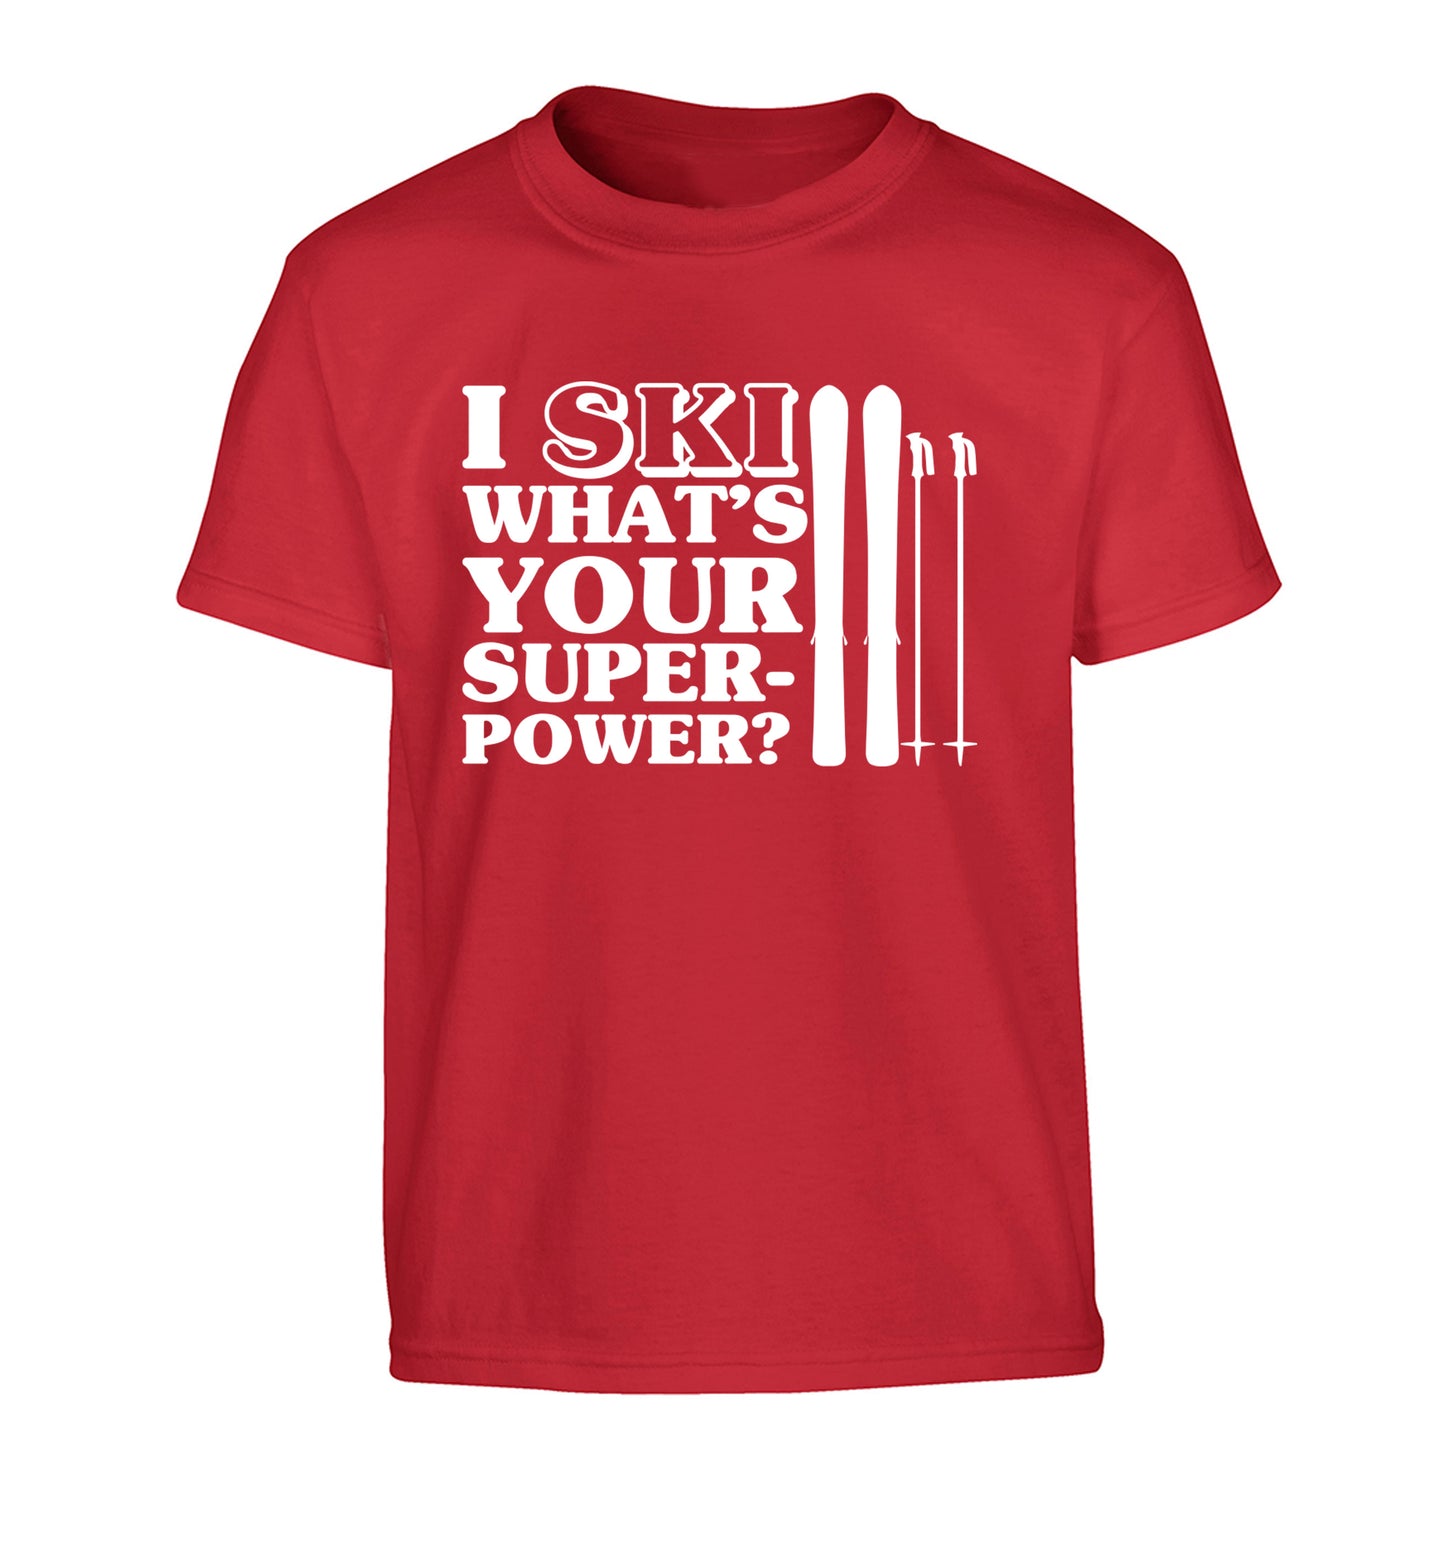 I ski what's your superpower? Children's red Tshirt 12-14 Years